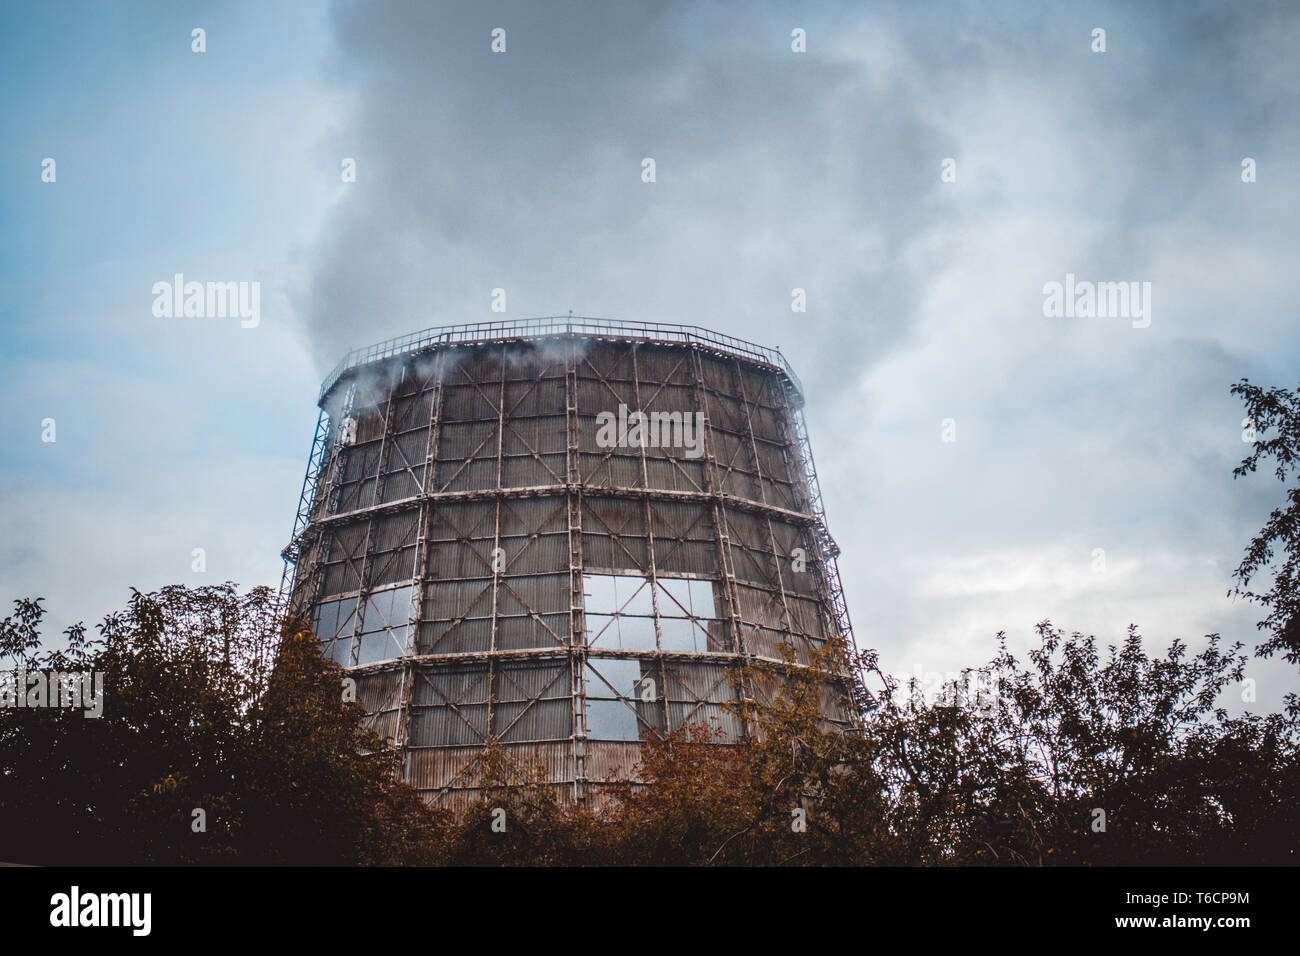 big old cooling pipe with steam, smoke in cloudy weather in autumn Stock Photo